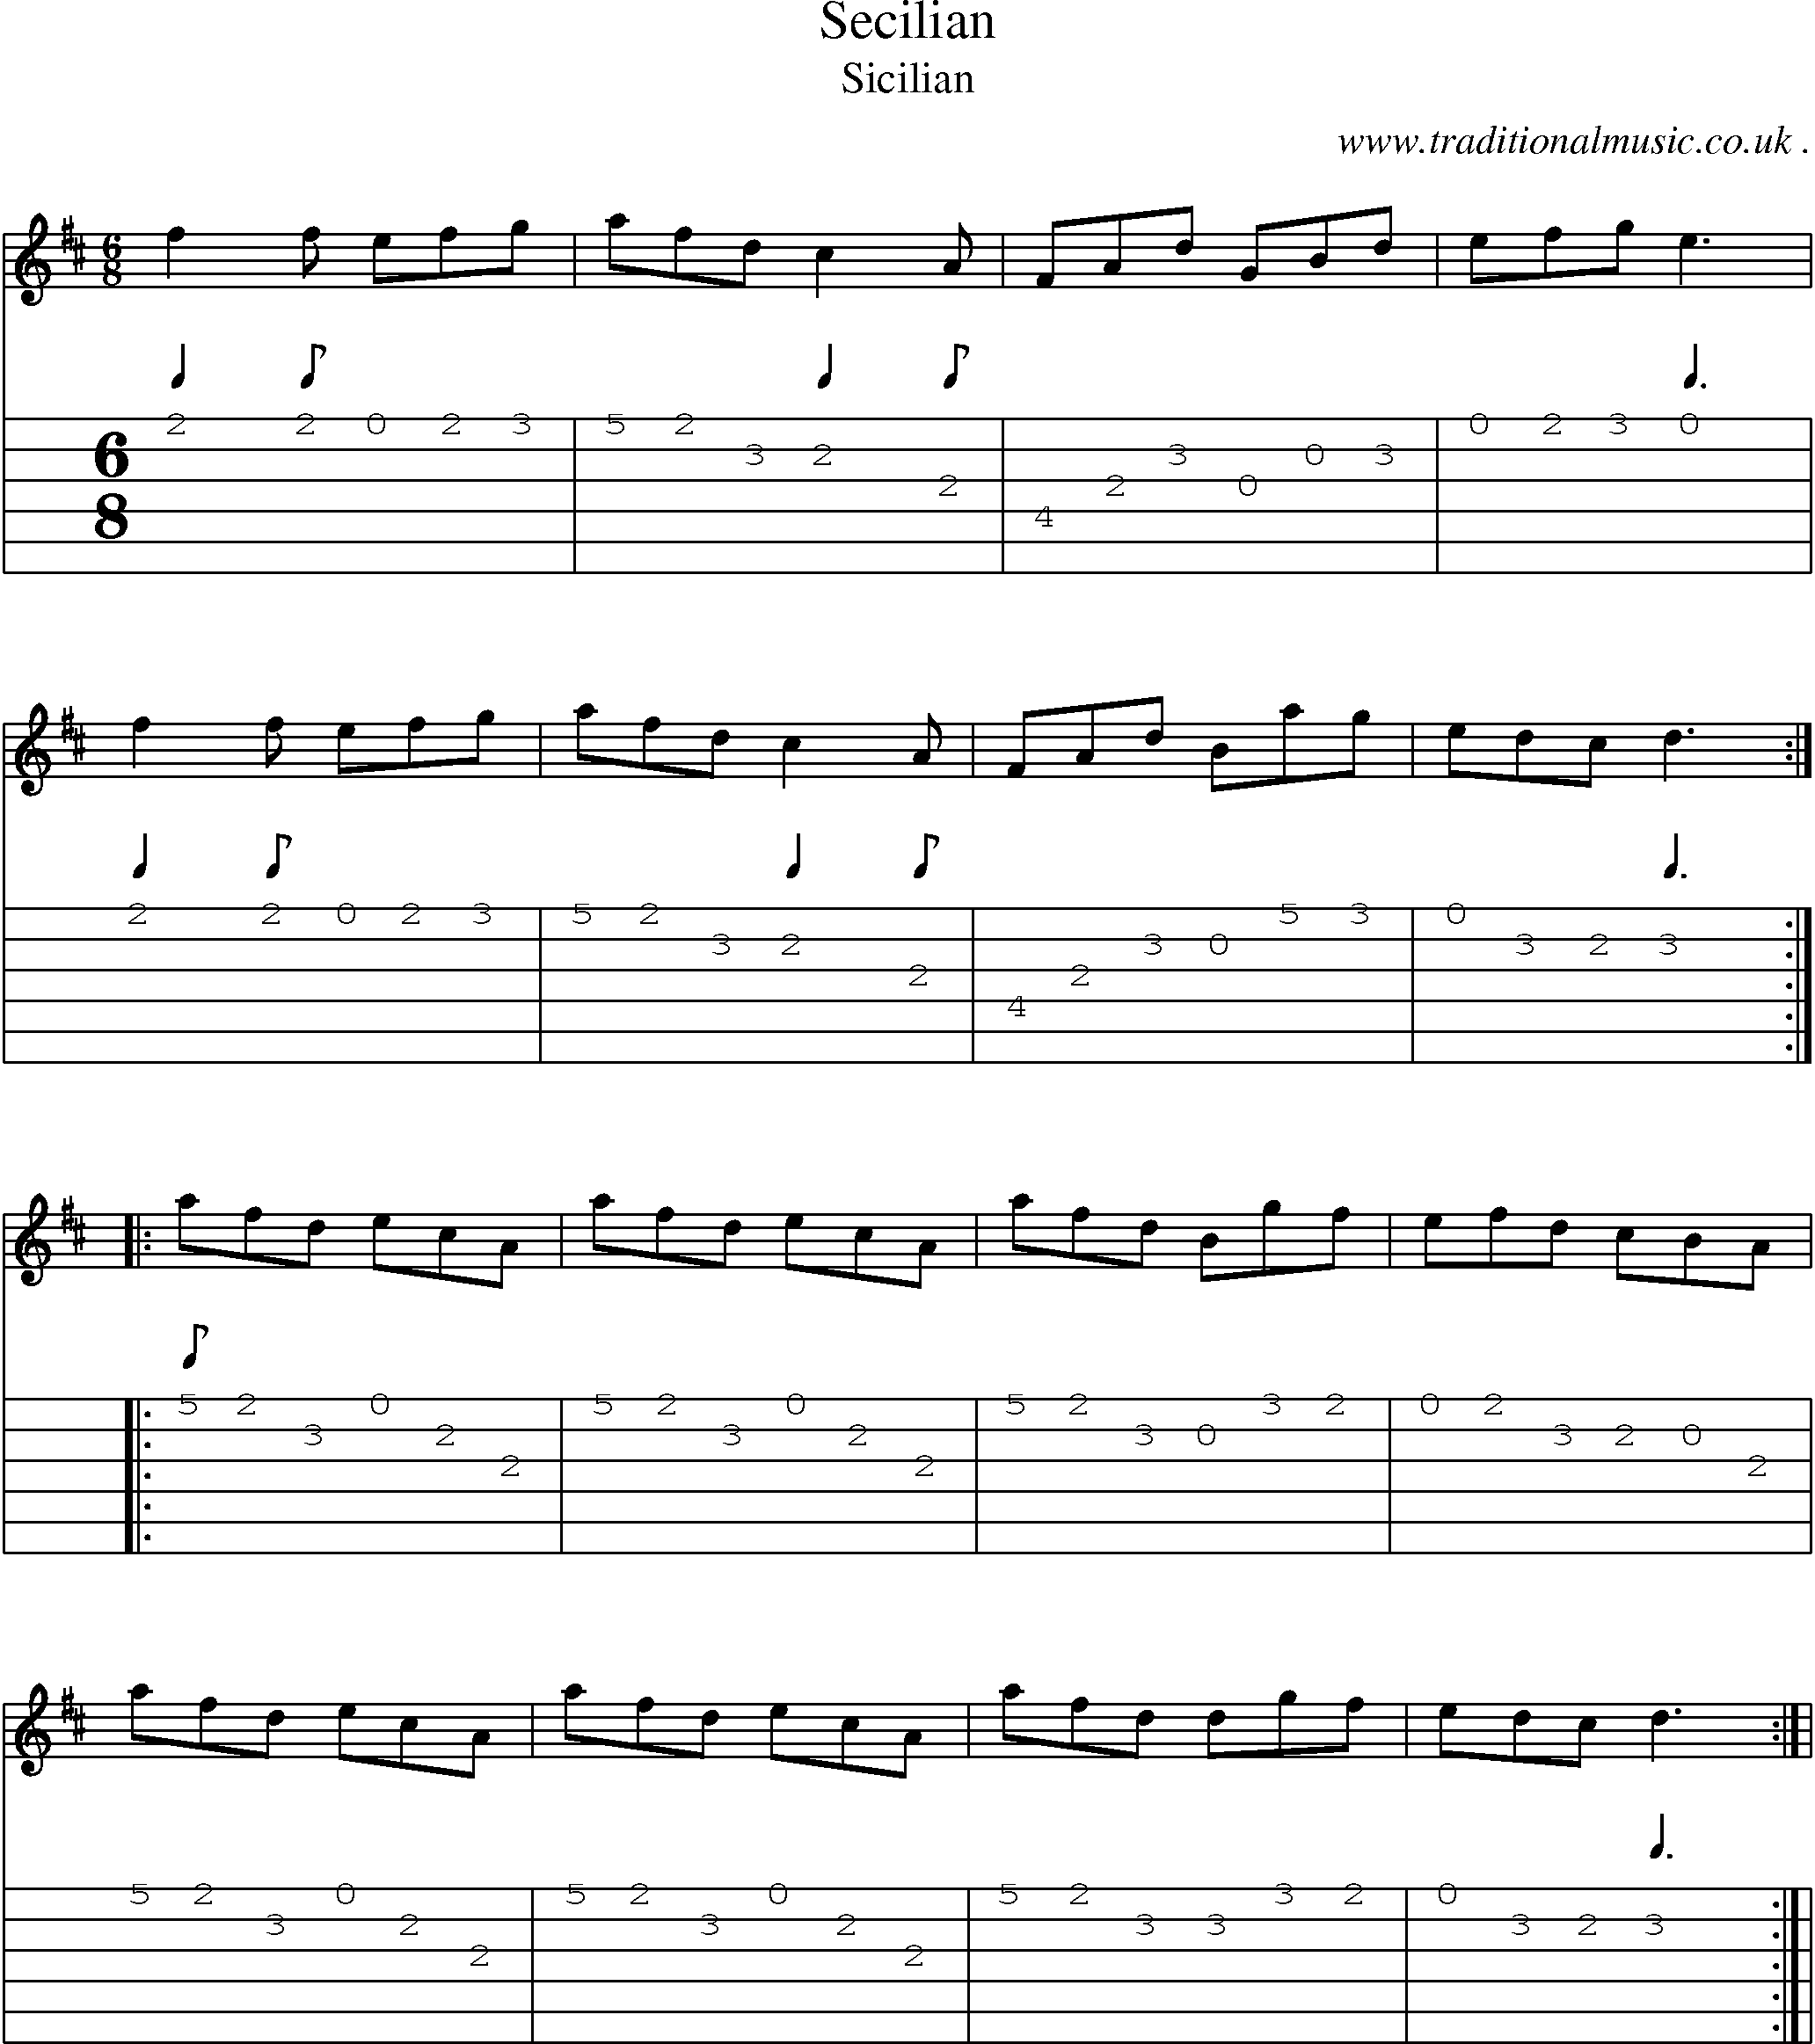 Sheet-Music and Guitar Tabs for Secilian